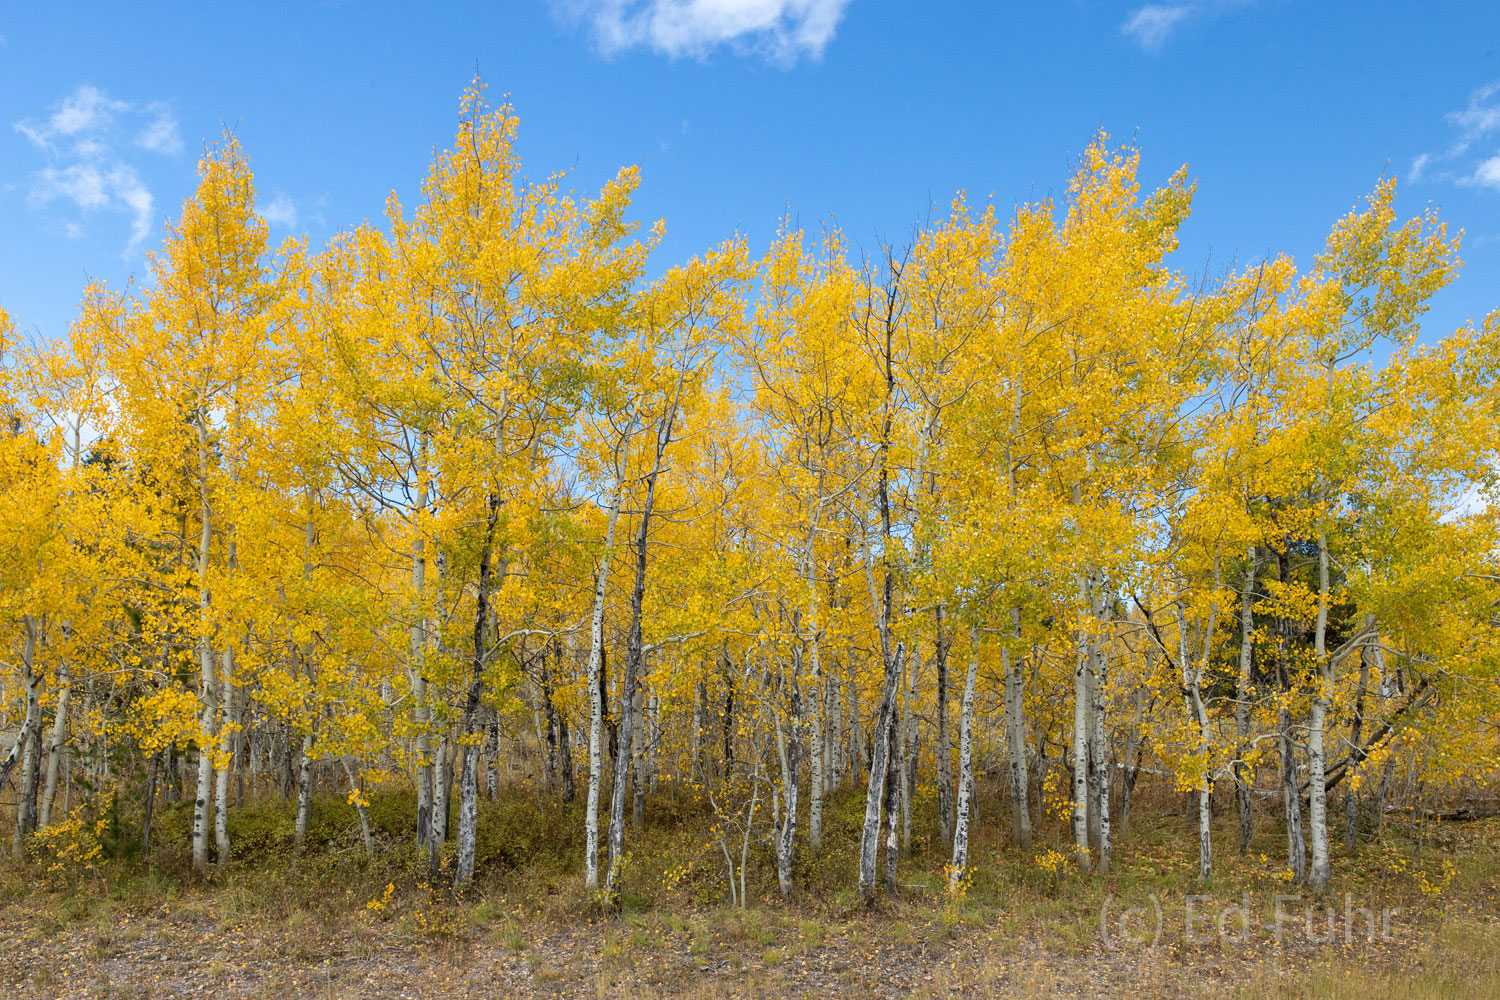 A grove of aspens show off their early yellow foliage against a morning sky.